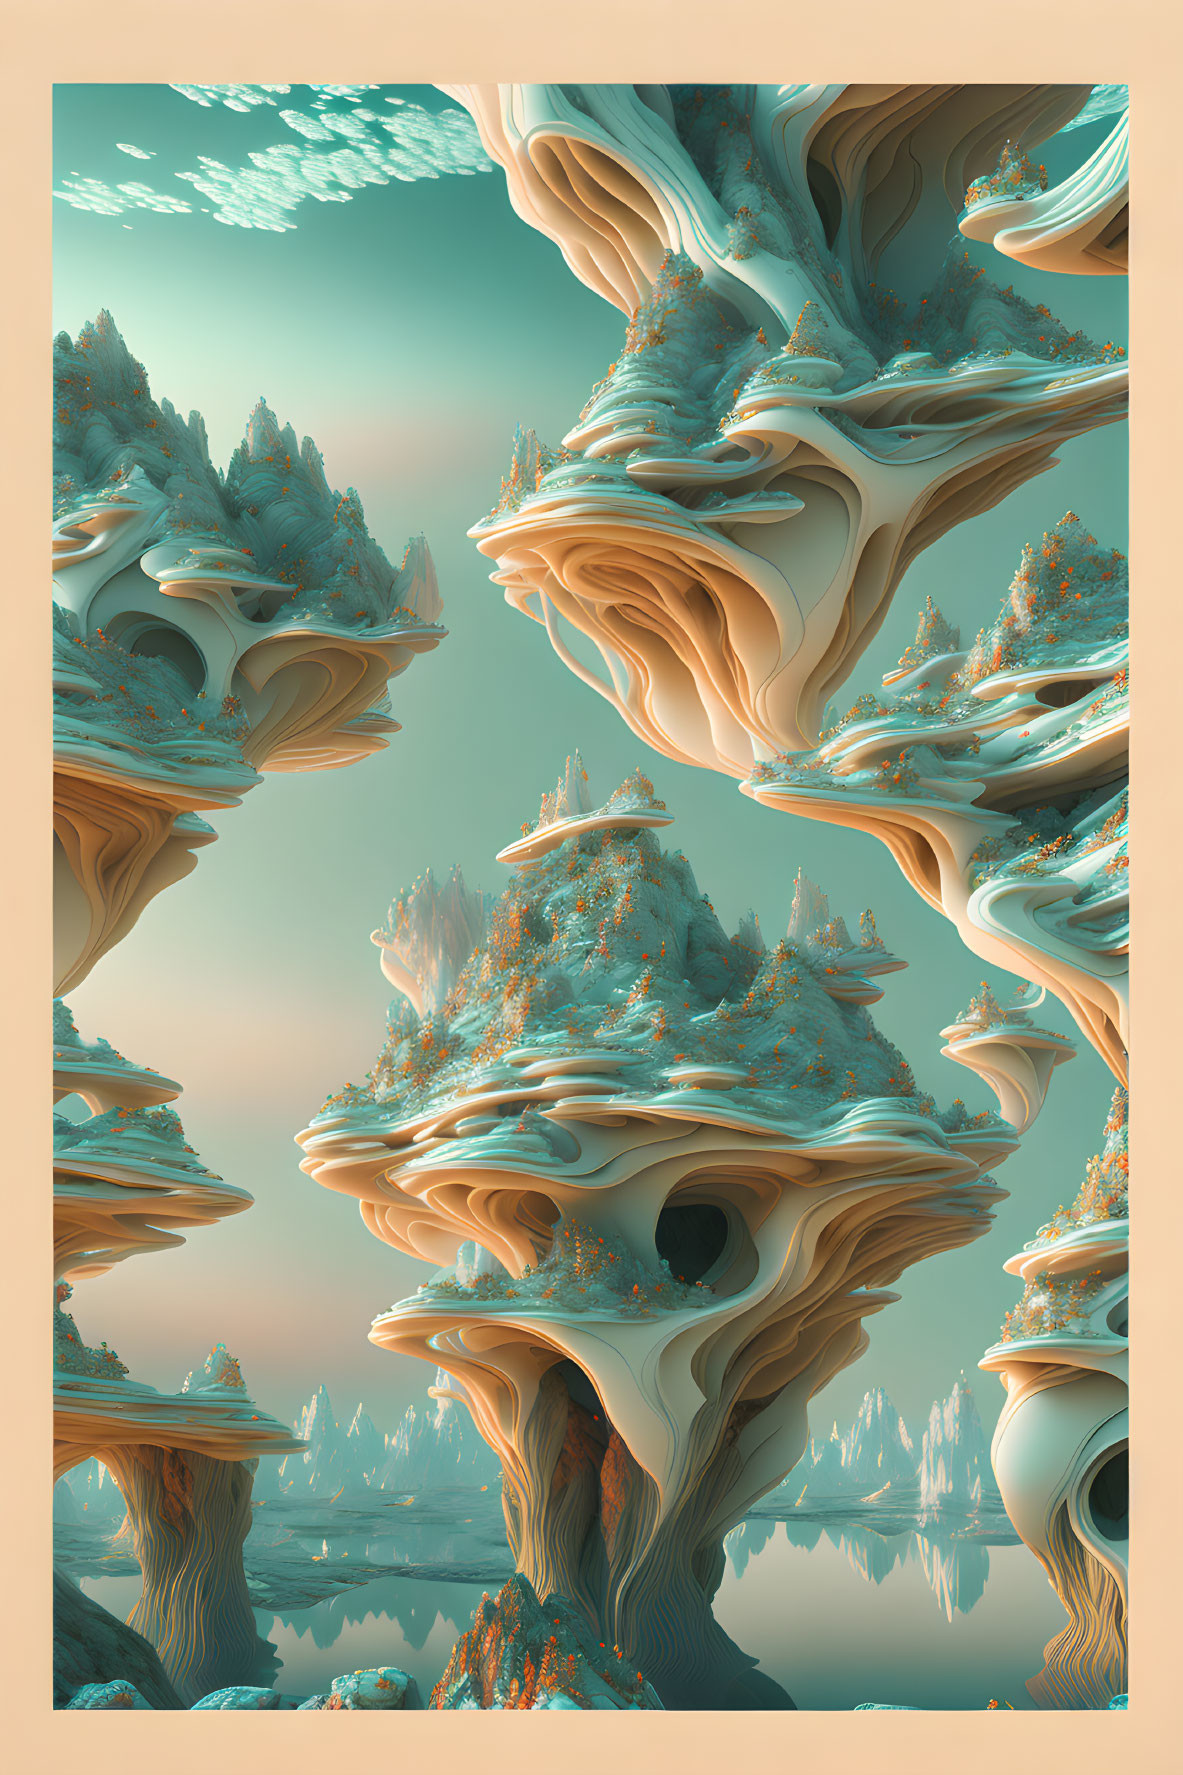 Ethereal landscape with layered rock formations and tree-like structures in orange and teal hues